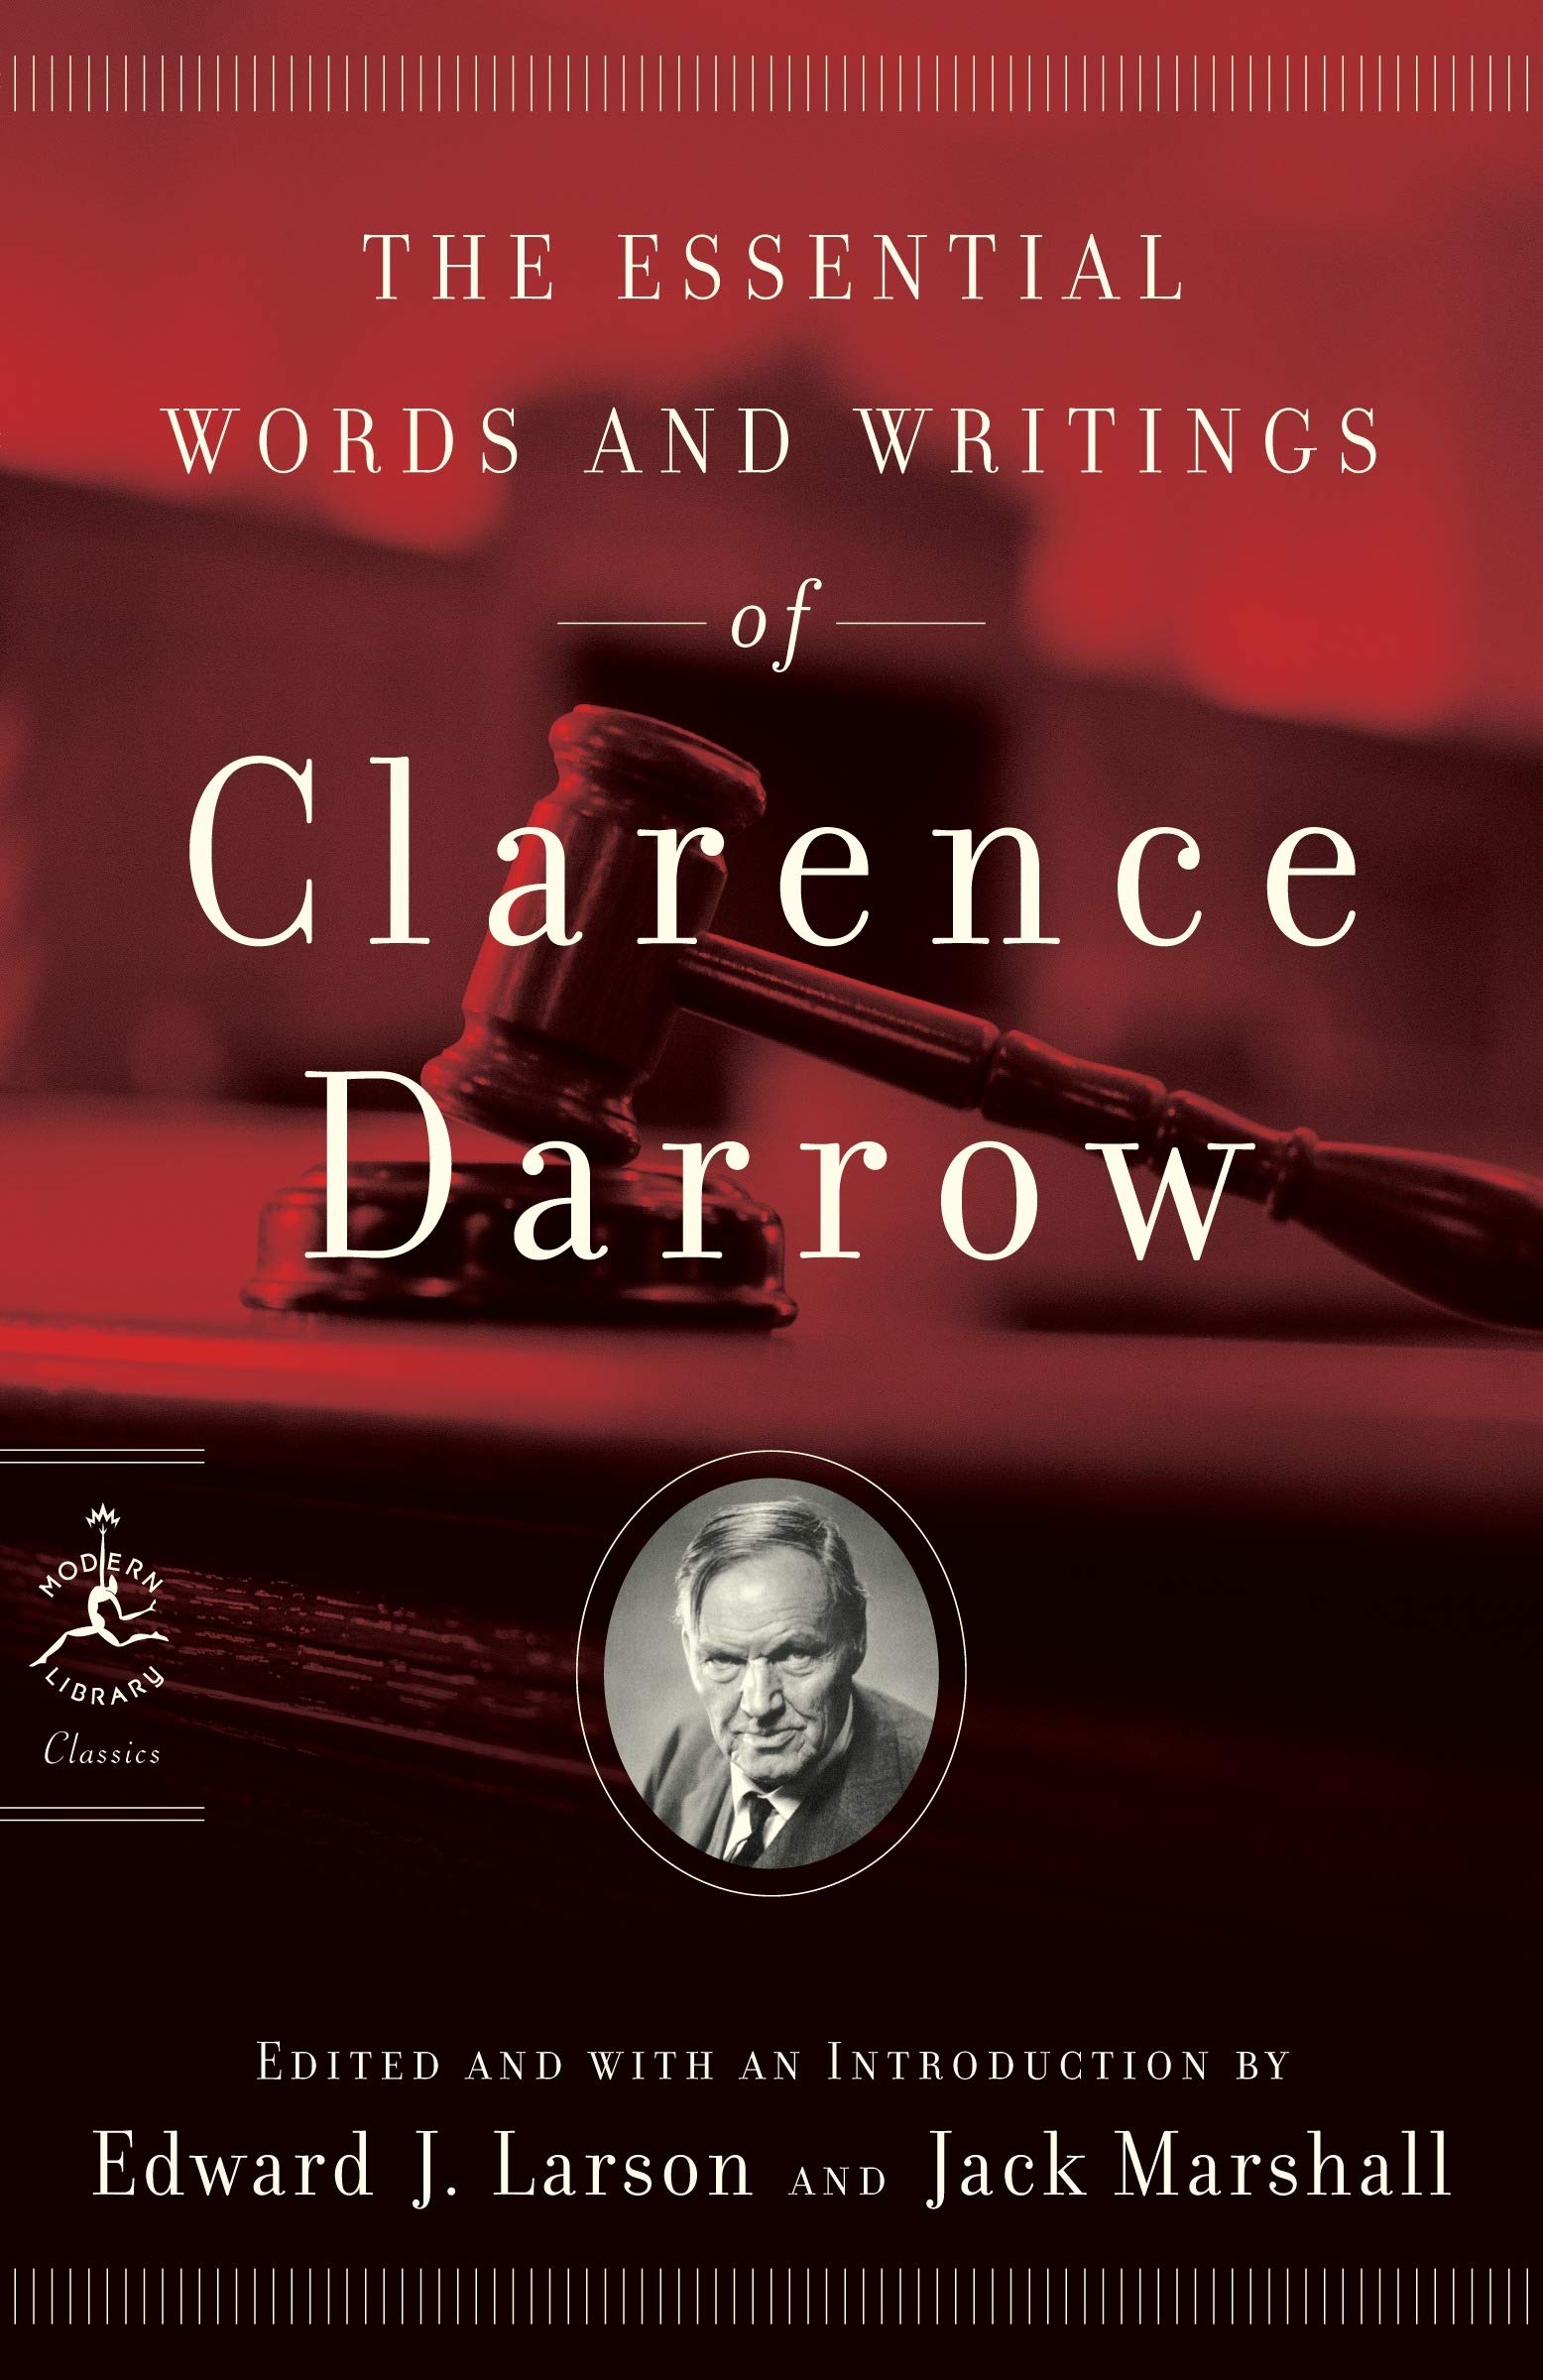 The essential words and writings of Clarence Darrow (book cover)